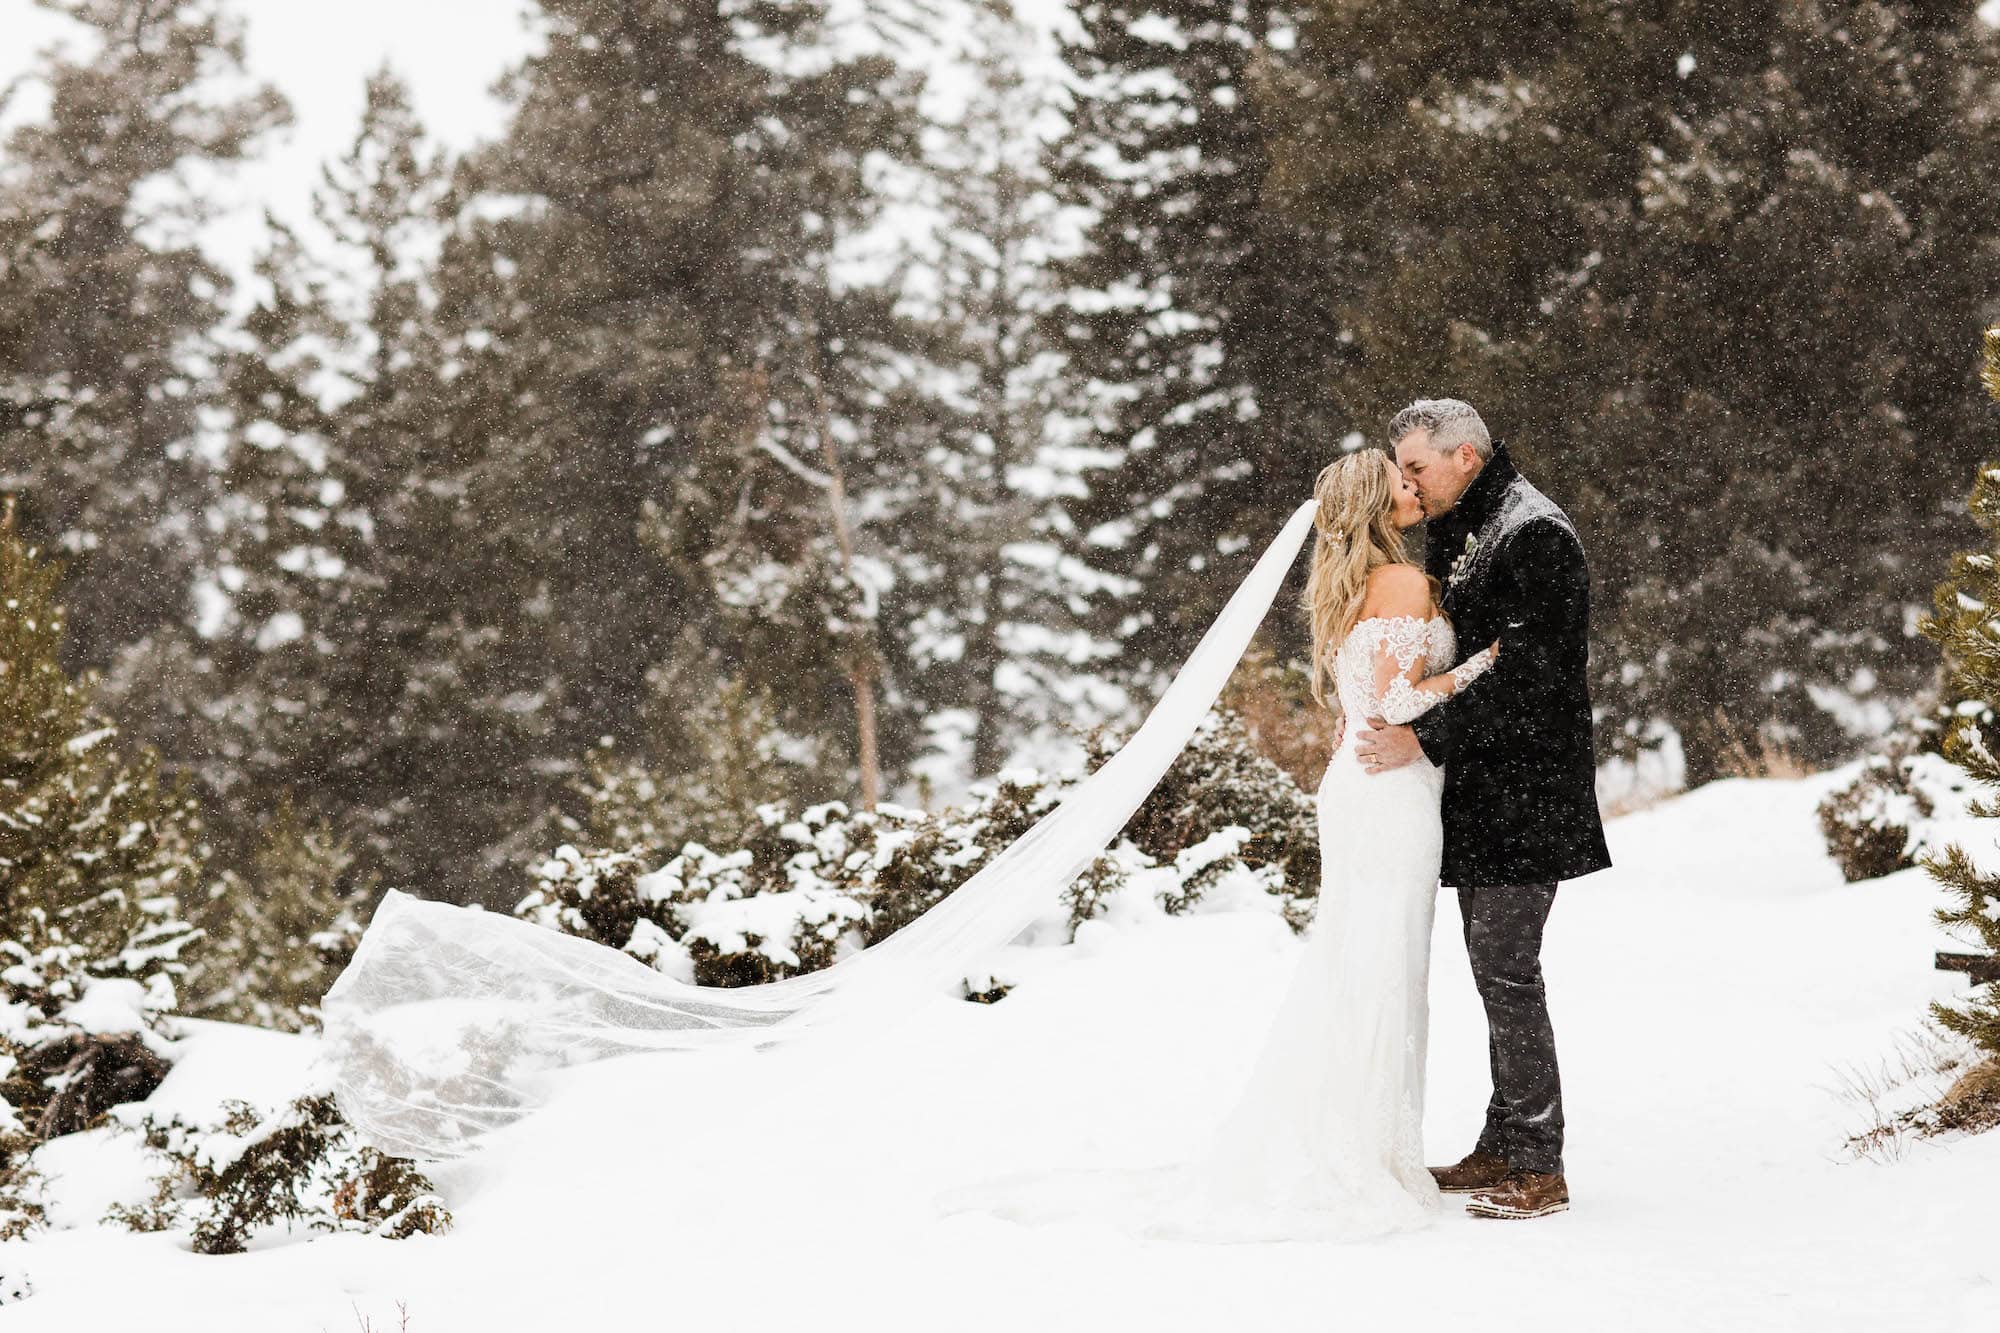 Winter Elopement Ideas and Tips - Our Advice for Eloping During Winter